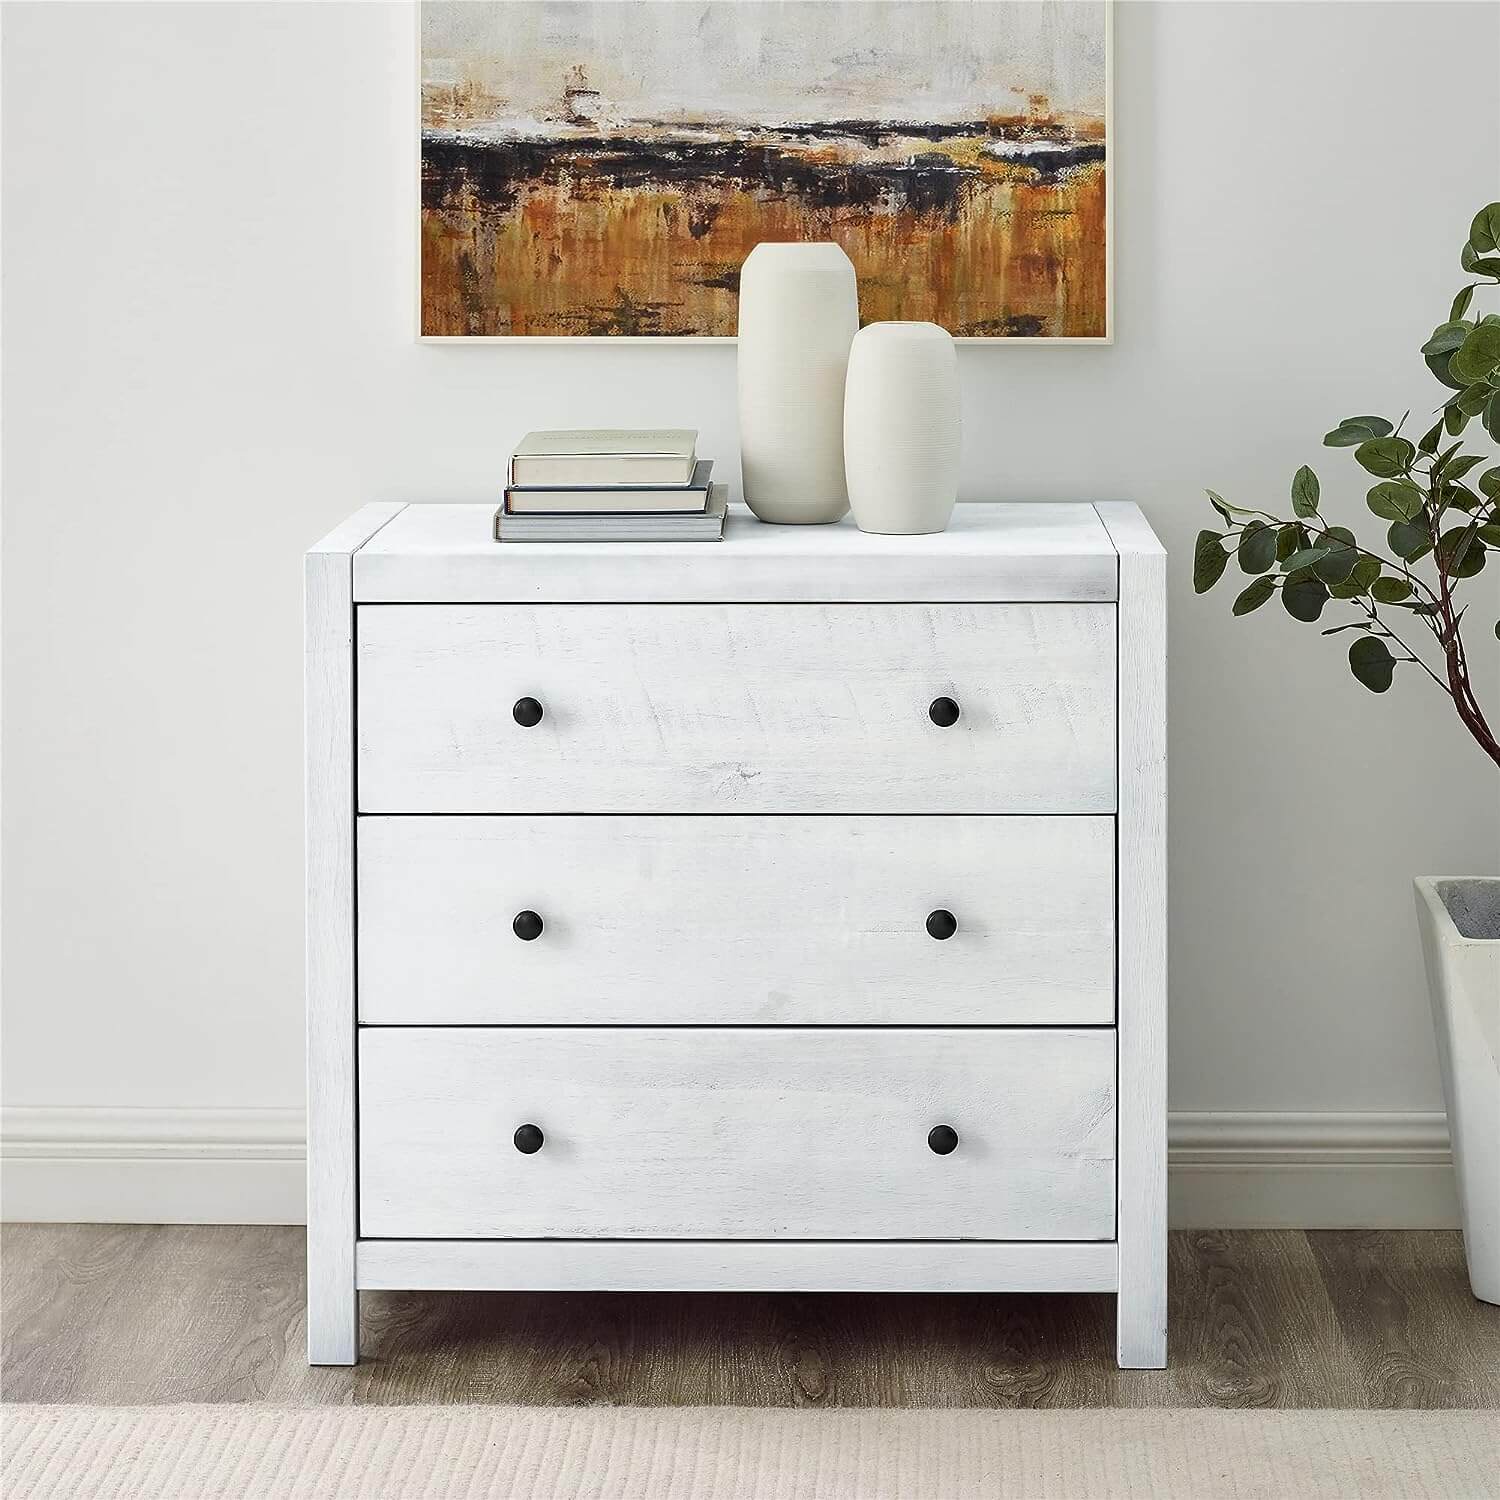 In The Quest For A Dresser, a white farmhouse style with black knobs